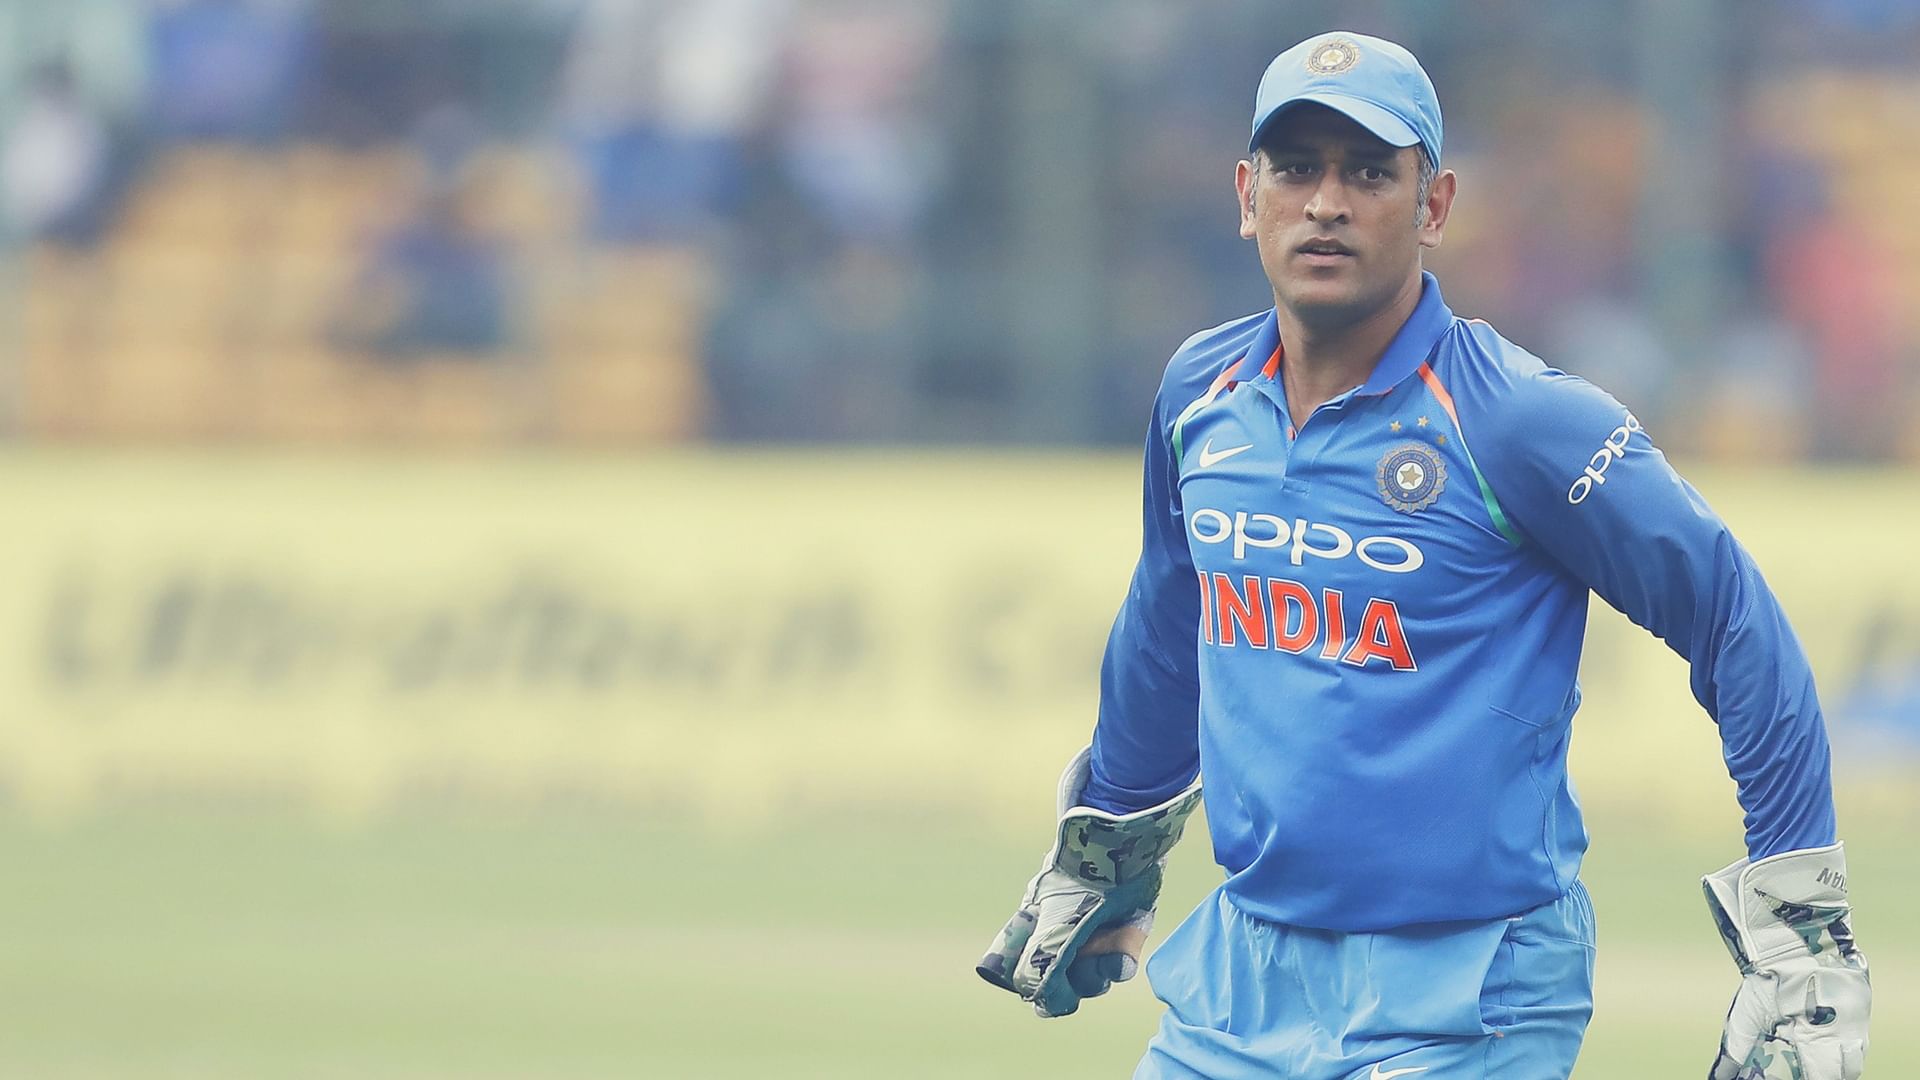 Whenever Dhoni’s name comes up, words and phrases like ‘legend’, ‘star’, ‘finisher’, ‘wonder of modern-day cricket’ spring to mind.